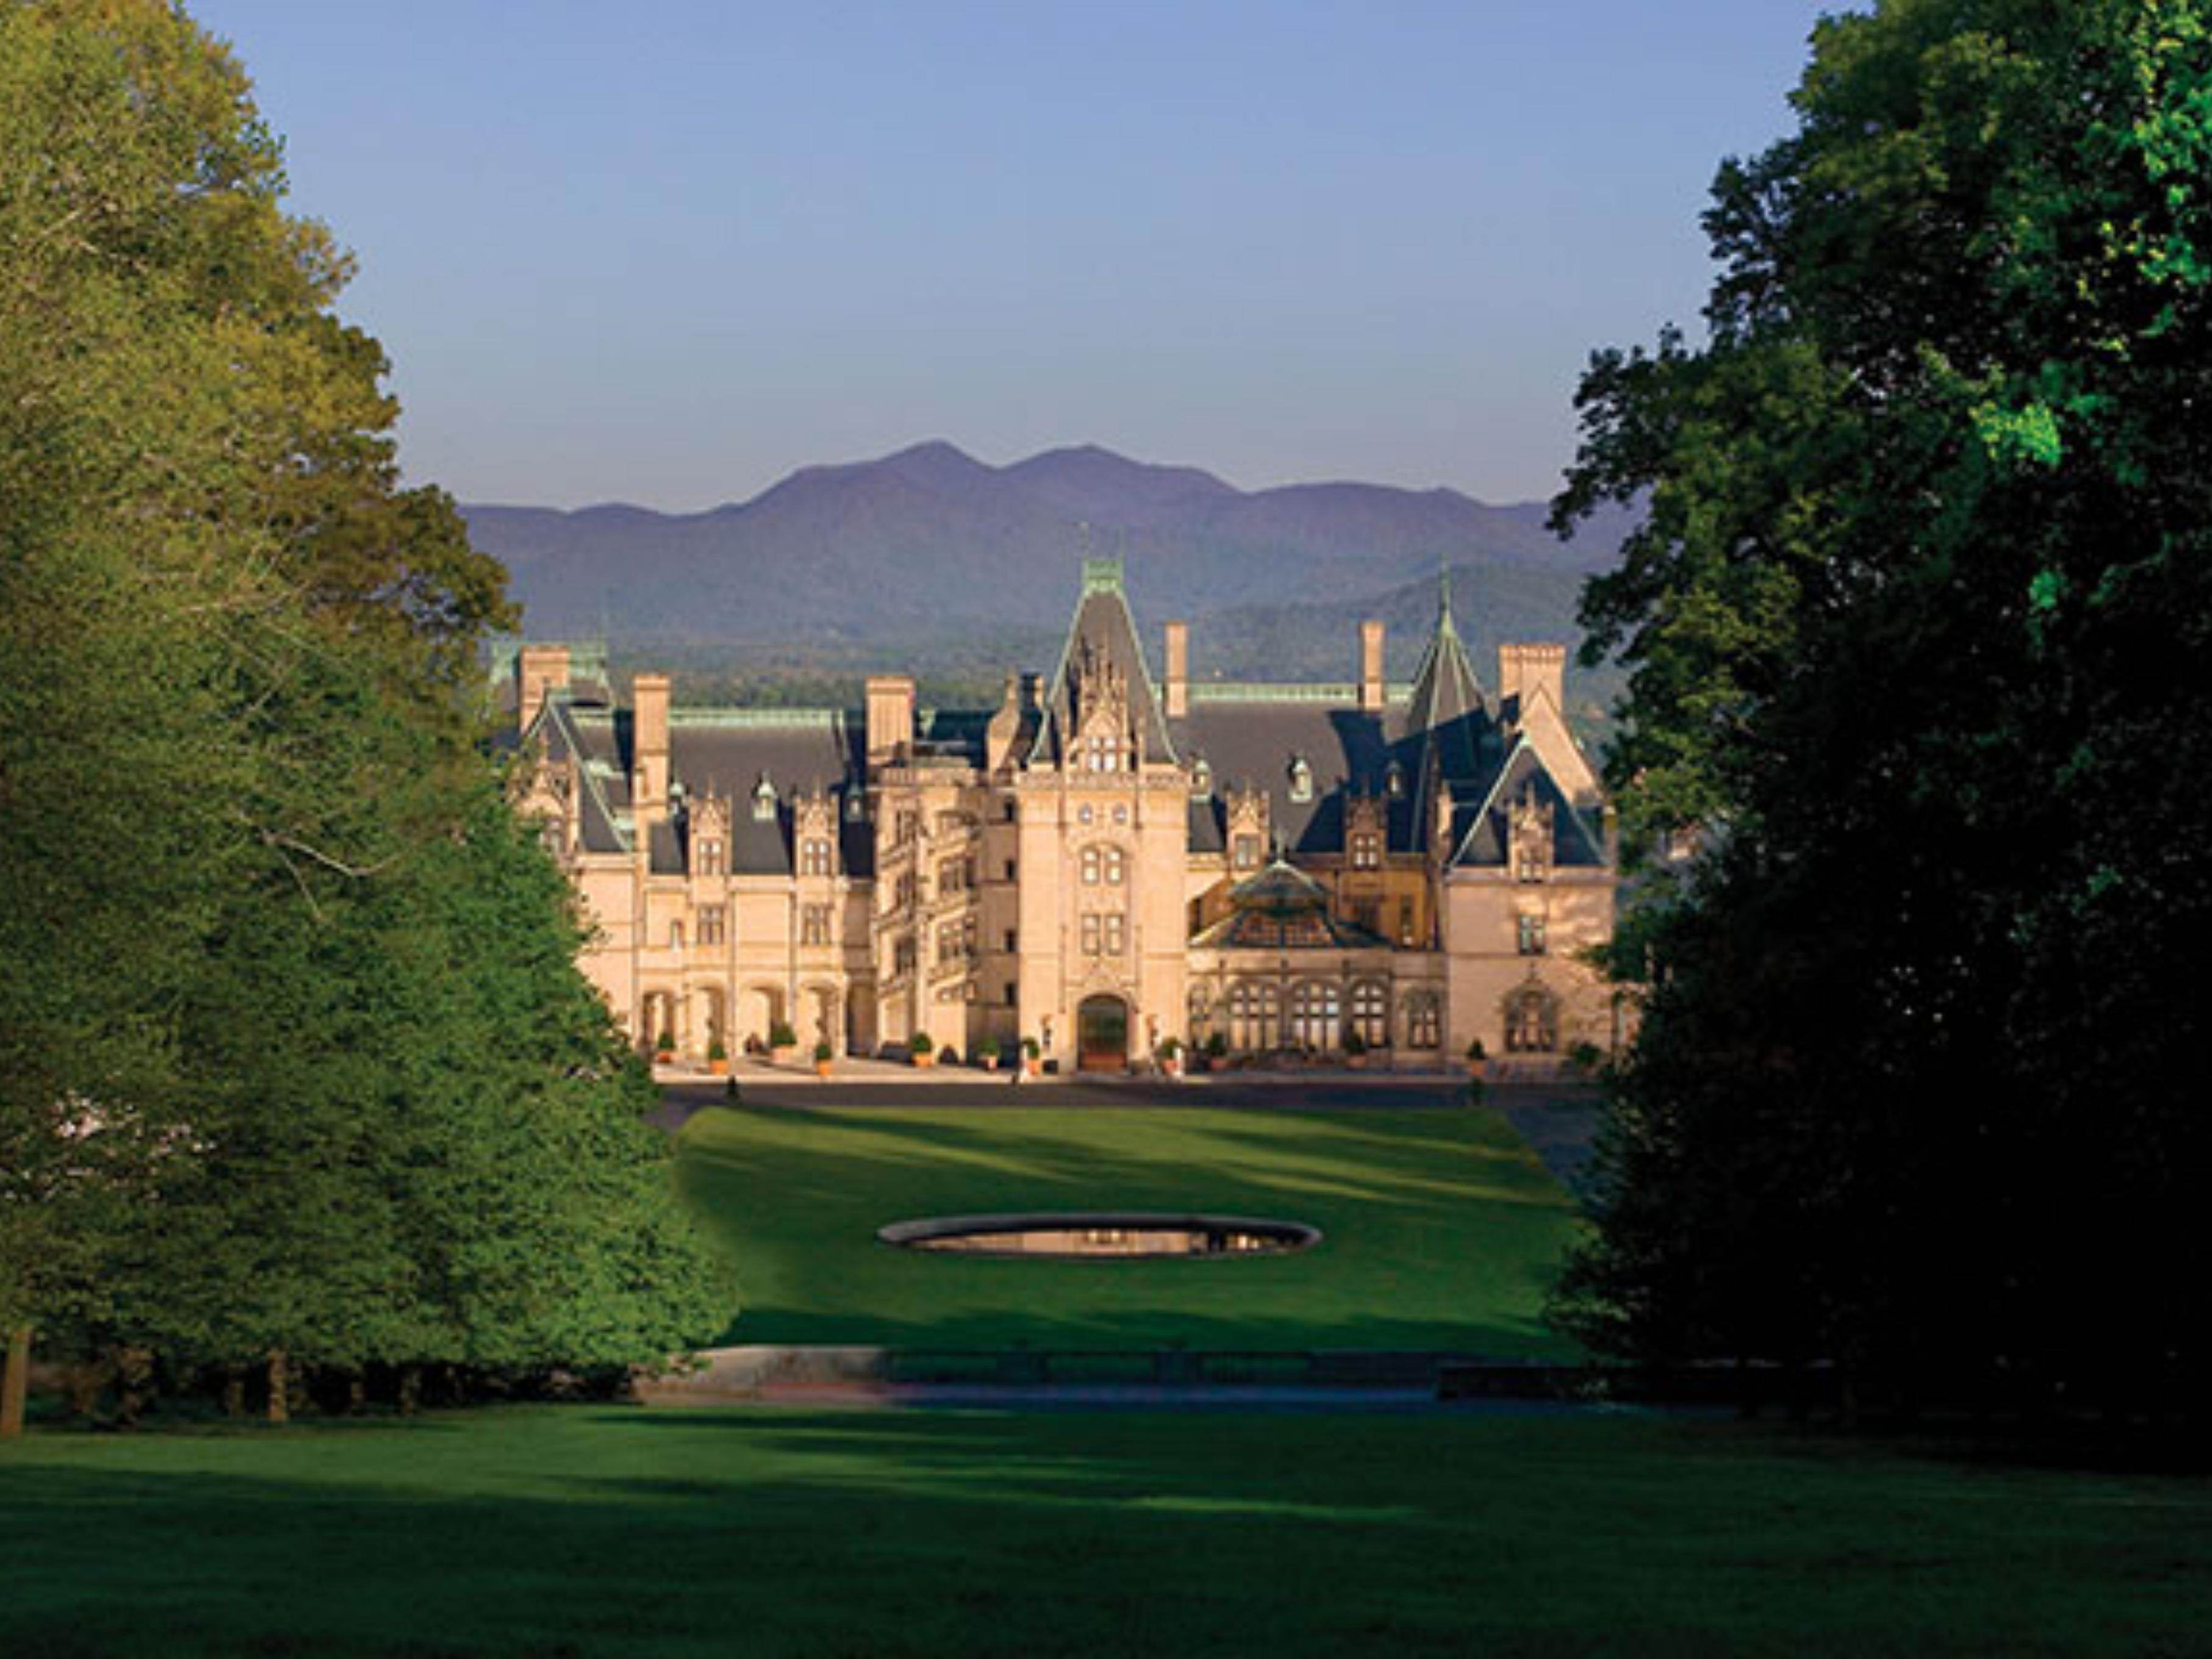 Explore the stunning and historic Biltmore Estate